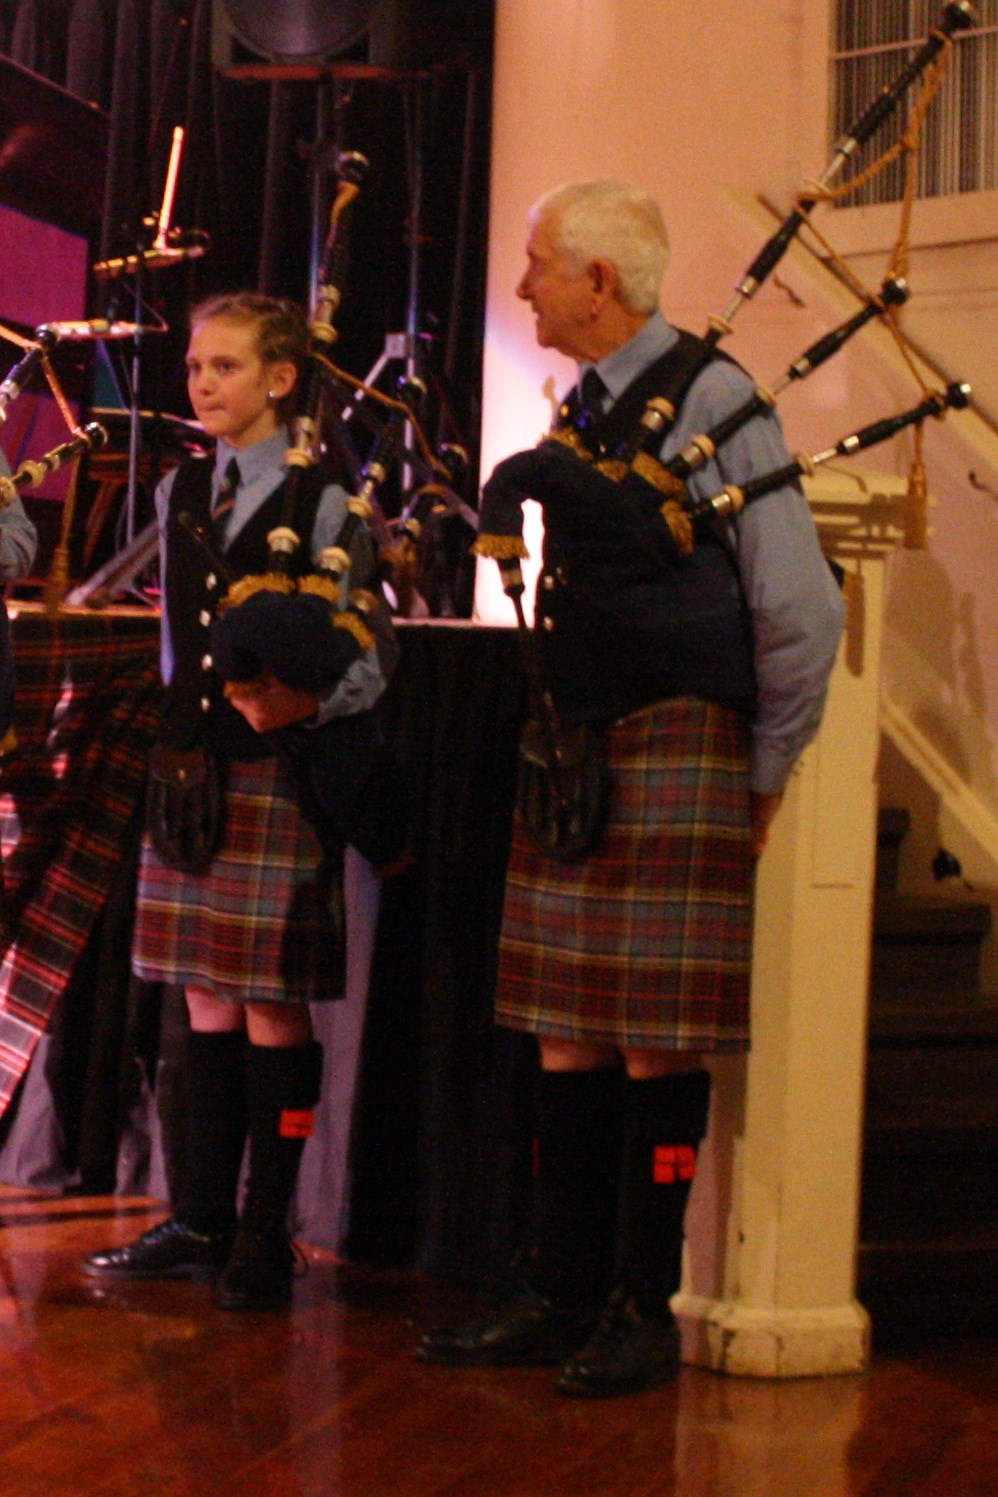 people are dressed in kilts and pipe band attire